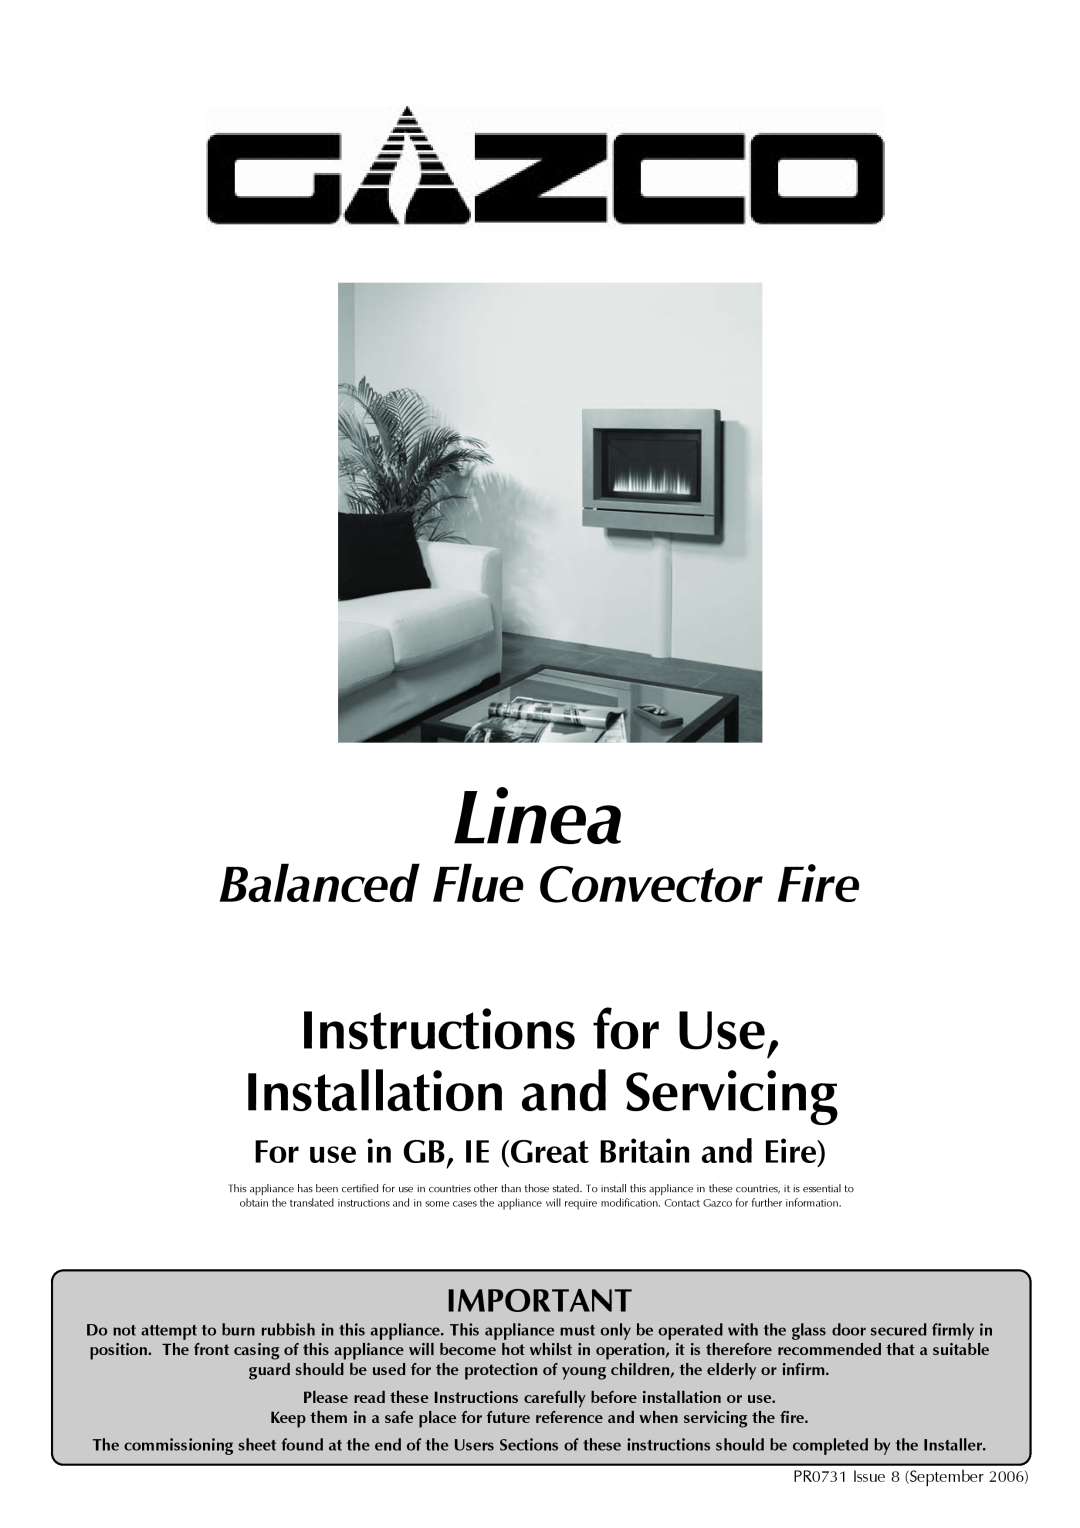 Stovax GAZCO Linea Balanced Flue Convector Fire manual For use in GB, IE Great Britain and Eire 